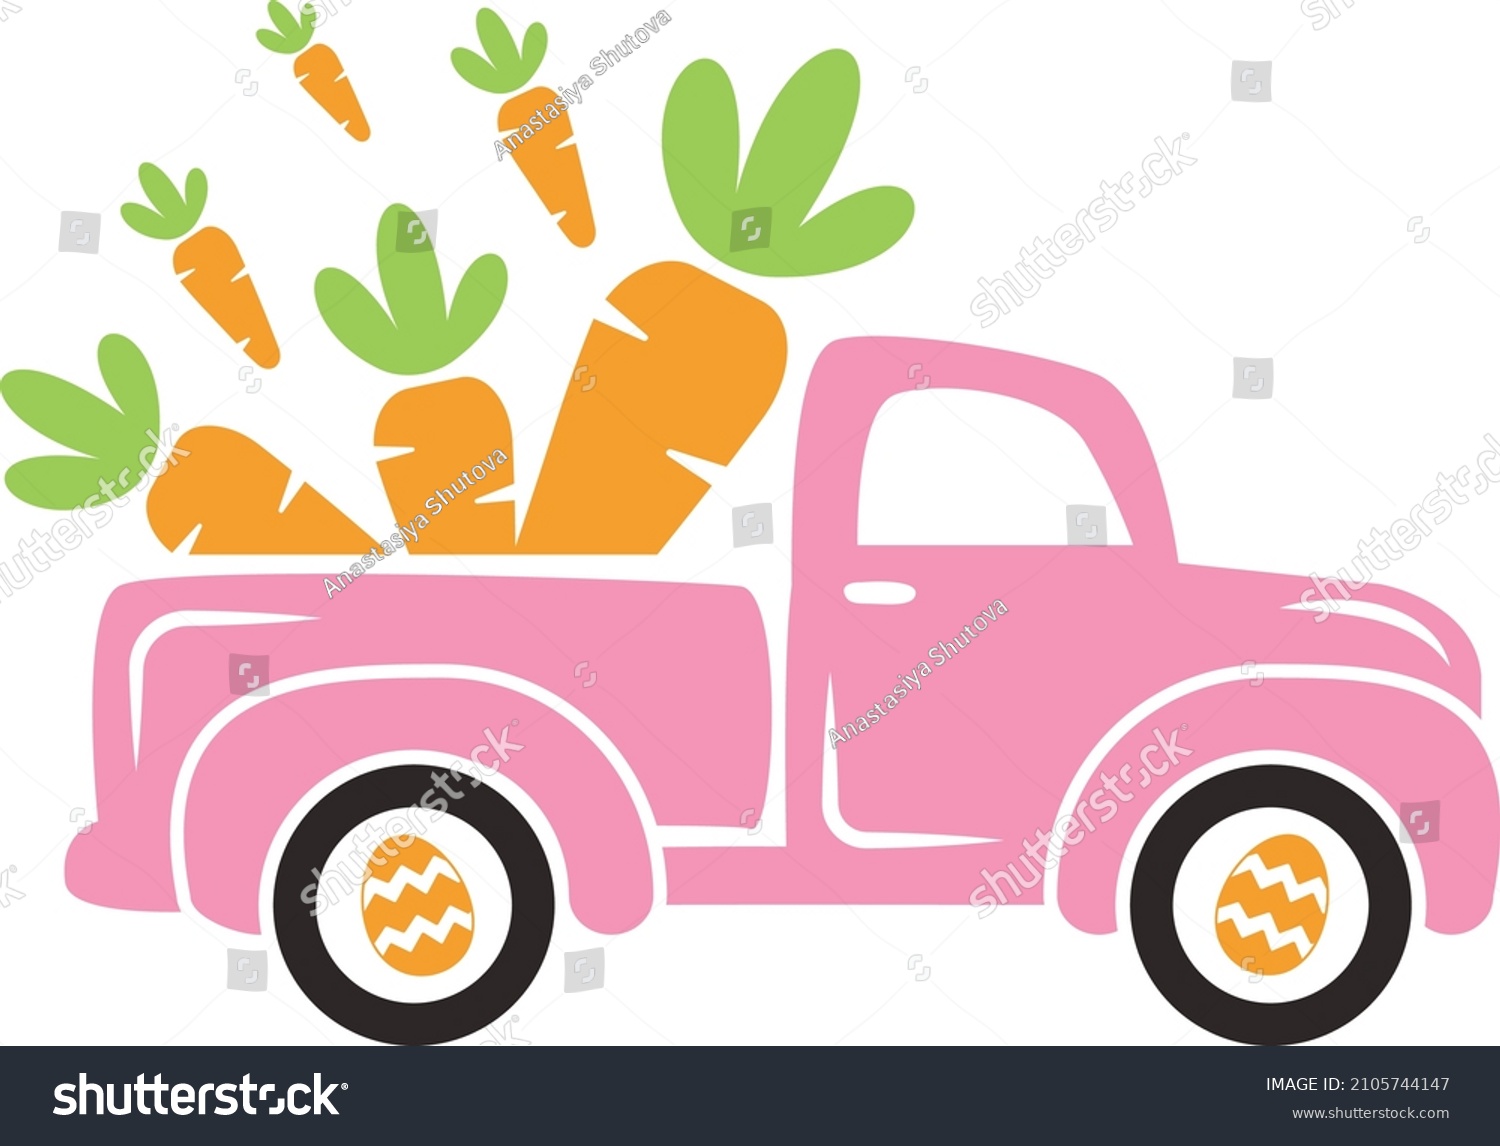 SVG of Cute Easter truck Svg. Old vintage truck carrying carrots vector illustration isolated on white background. Easter clipart perfect for kids t-shirts, apparel, cards and so on svg